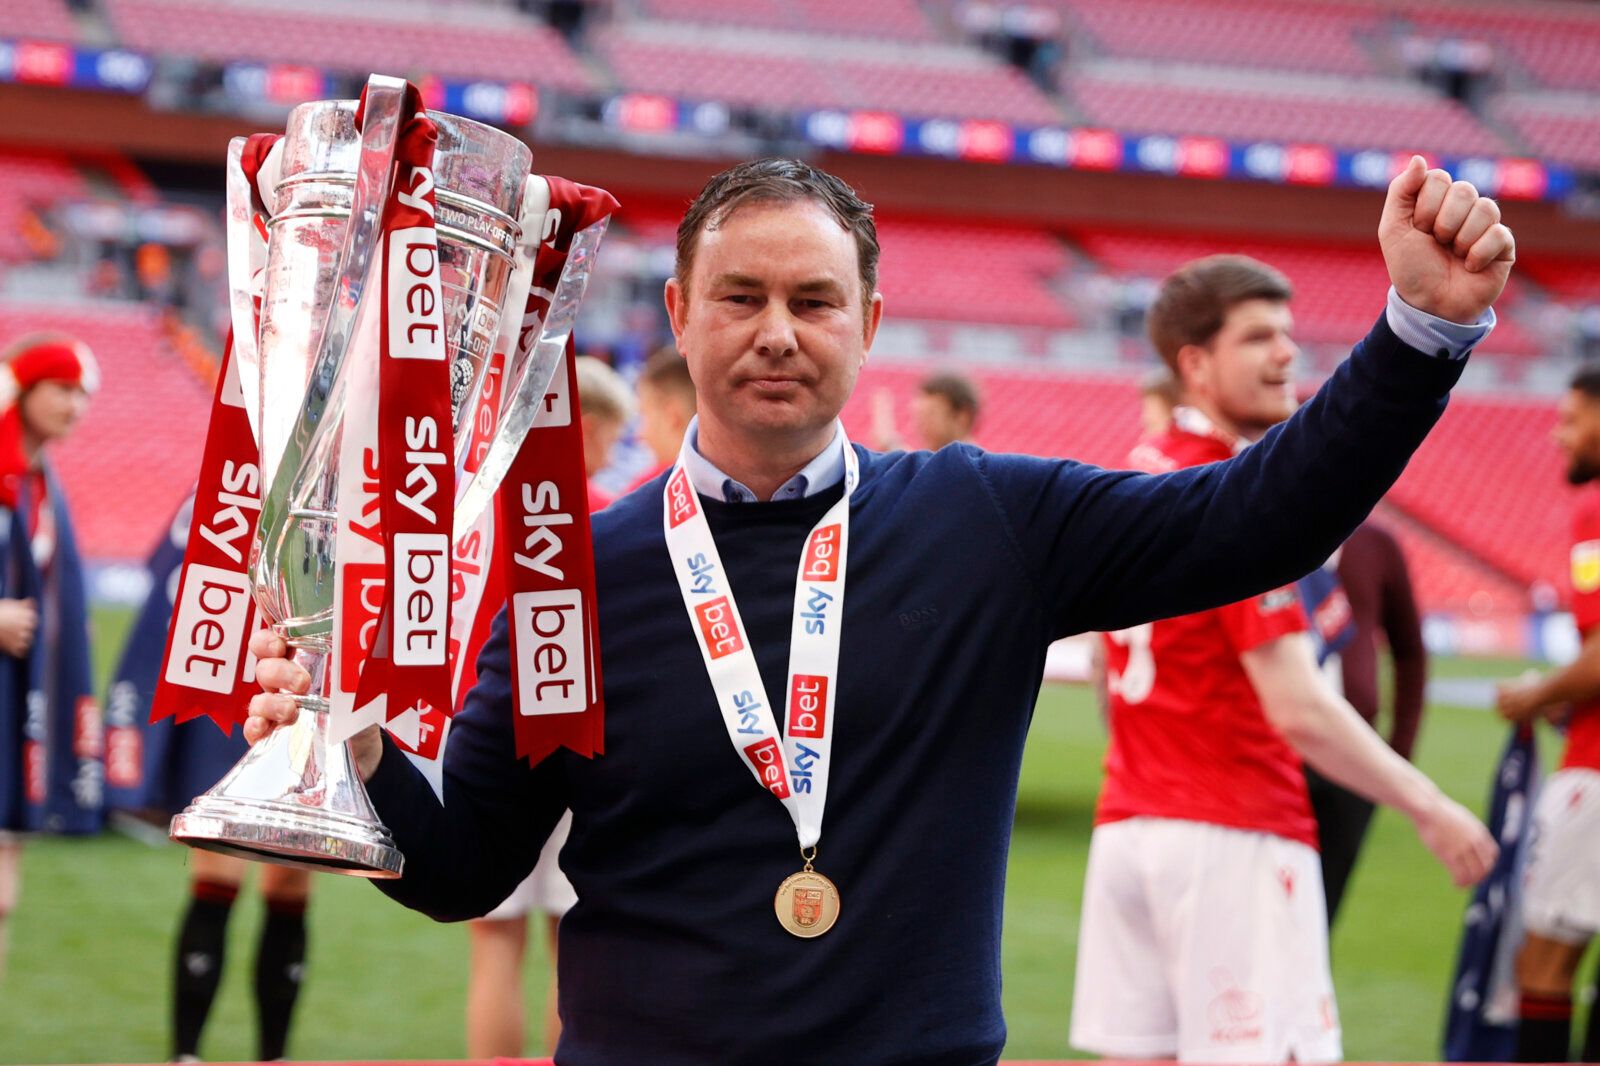 Soccer Football - League Two Play-Off Final - Morecambe v Newport County - Wembley Stadium, London, Britain - May 31, 2021 Morecambe manager Derek Adams celebrates with the trophy after winning the League Two Play-Off Final Action Images/John Sibley EDITORIAL USE ONLY. No use with unauthorized audio, video, data, fixture lists, club/league logos or 'live' services. Online in-match use limited to 75 images, no video emulation. No use in betting, games or single club /league/player publications.  